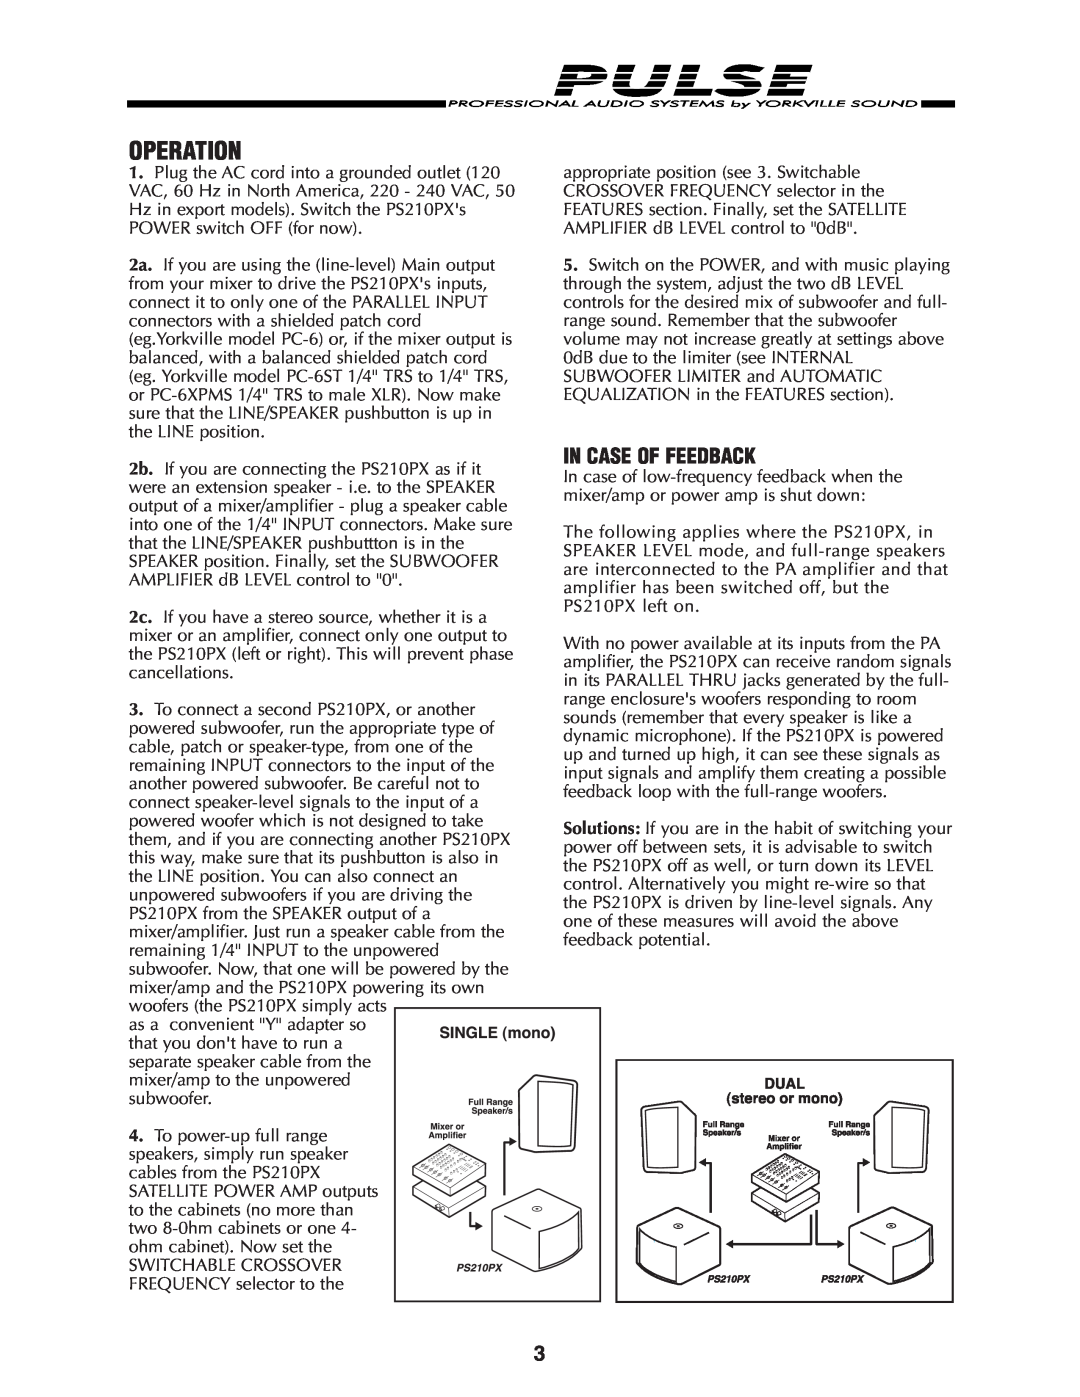 Yorkville Sound PS210PX manual Operation, In Case Of Feedback 